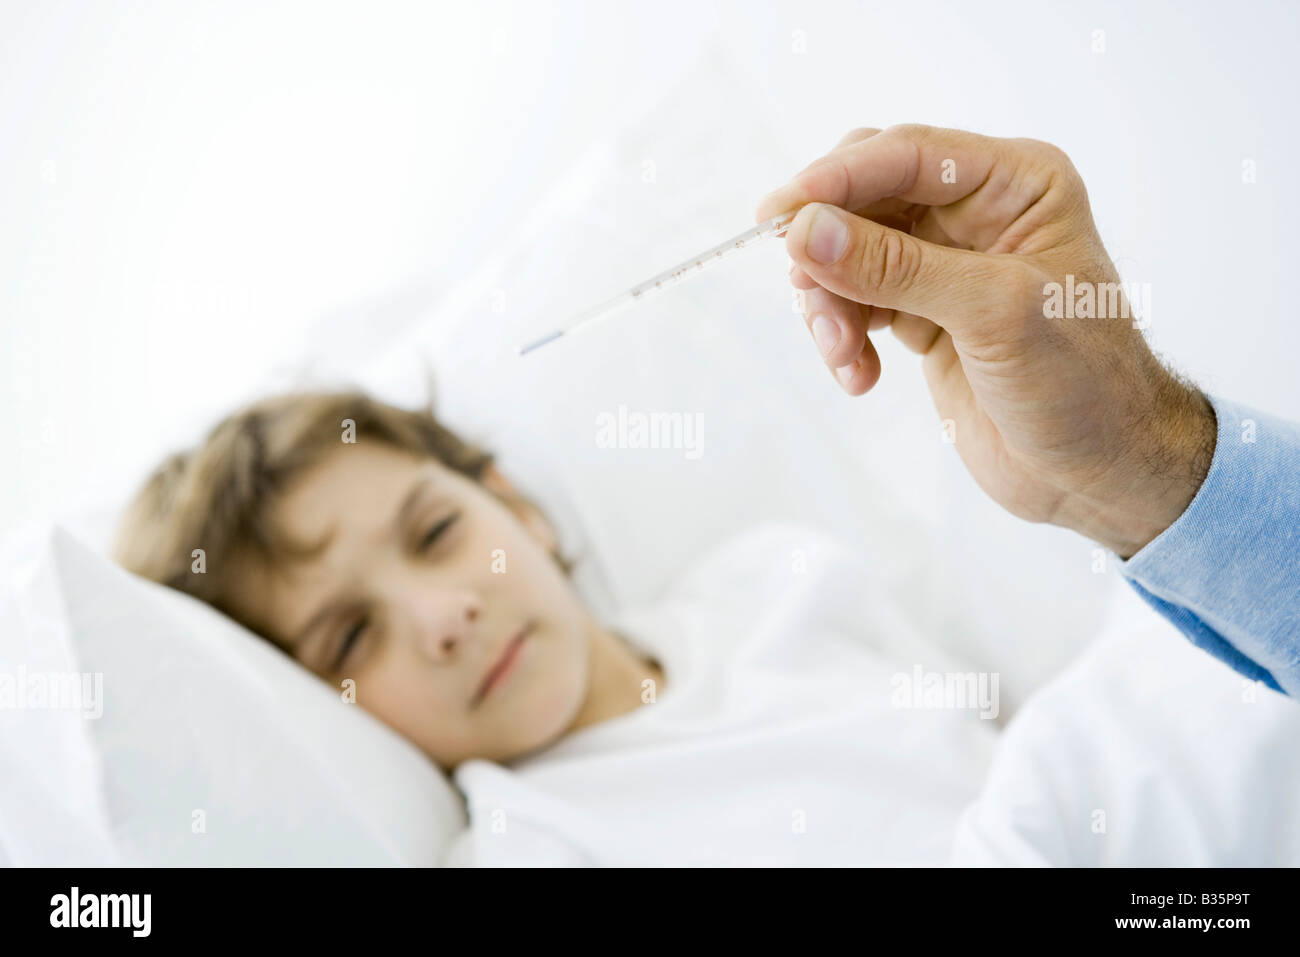 Little boy lying in bed, man's hand holding thermometer in foreground Stock Photo